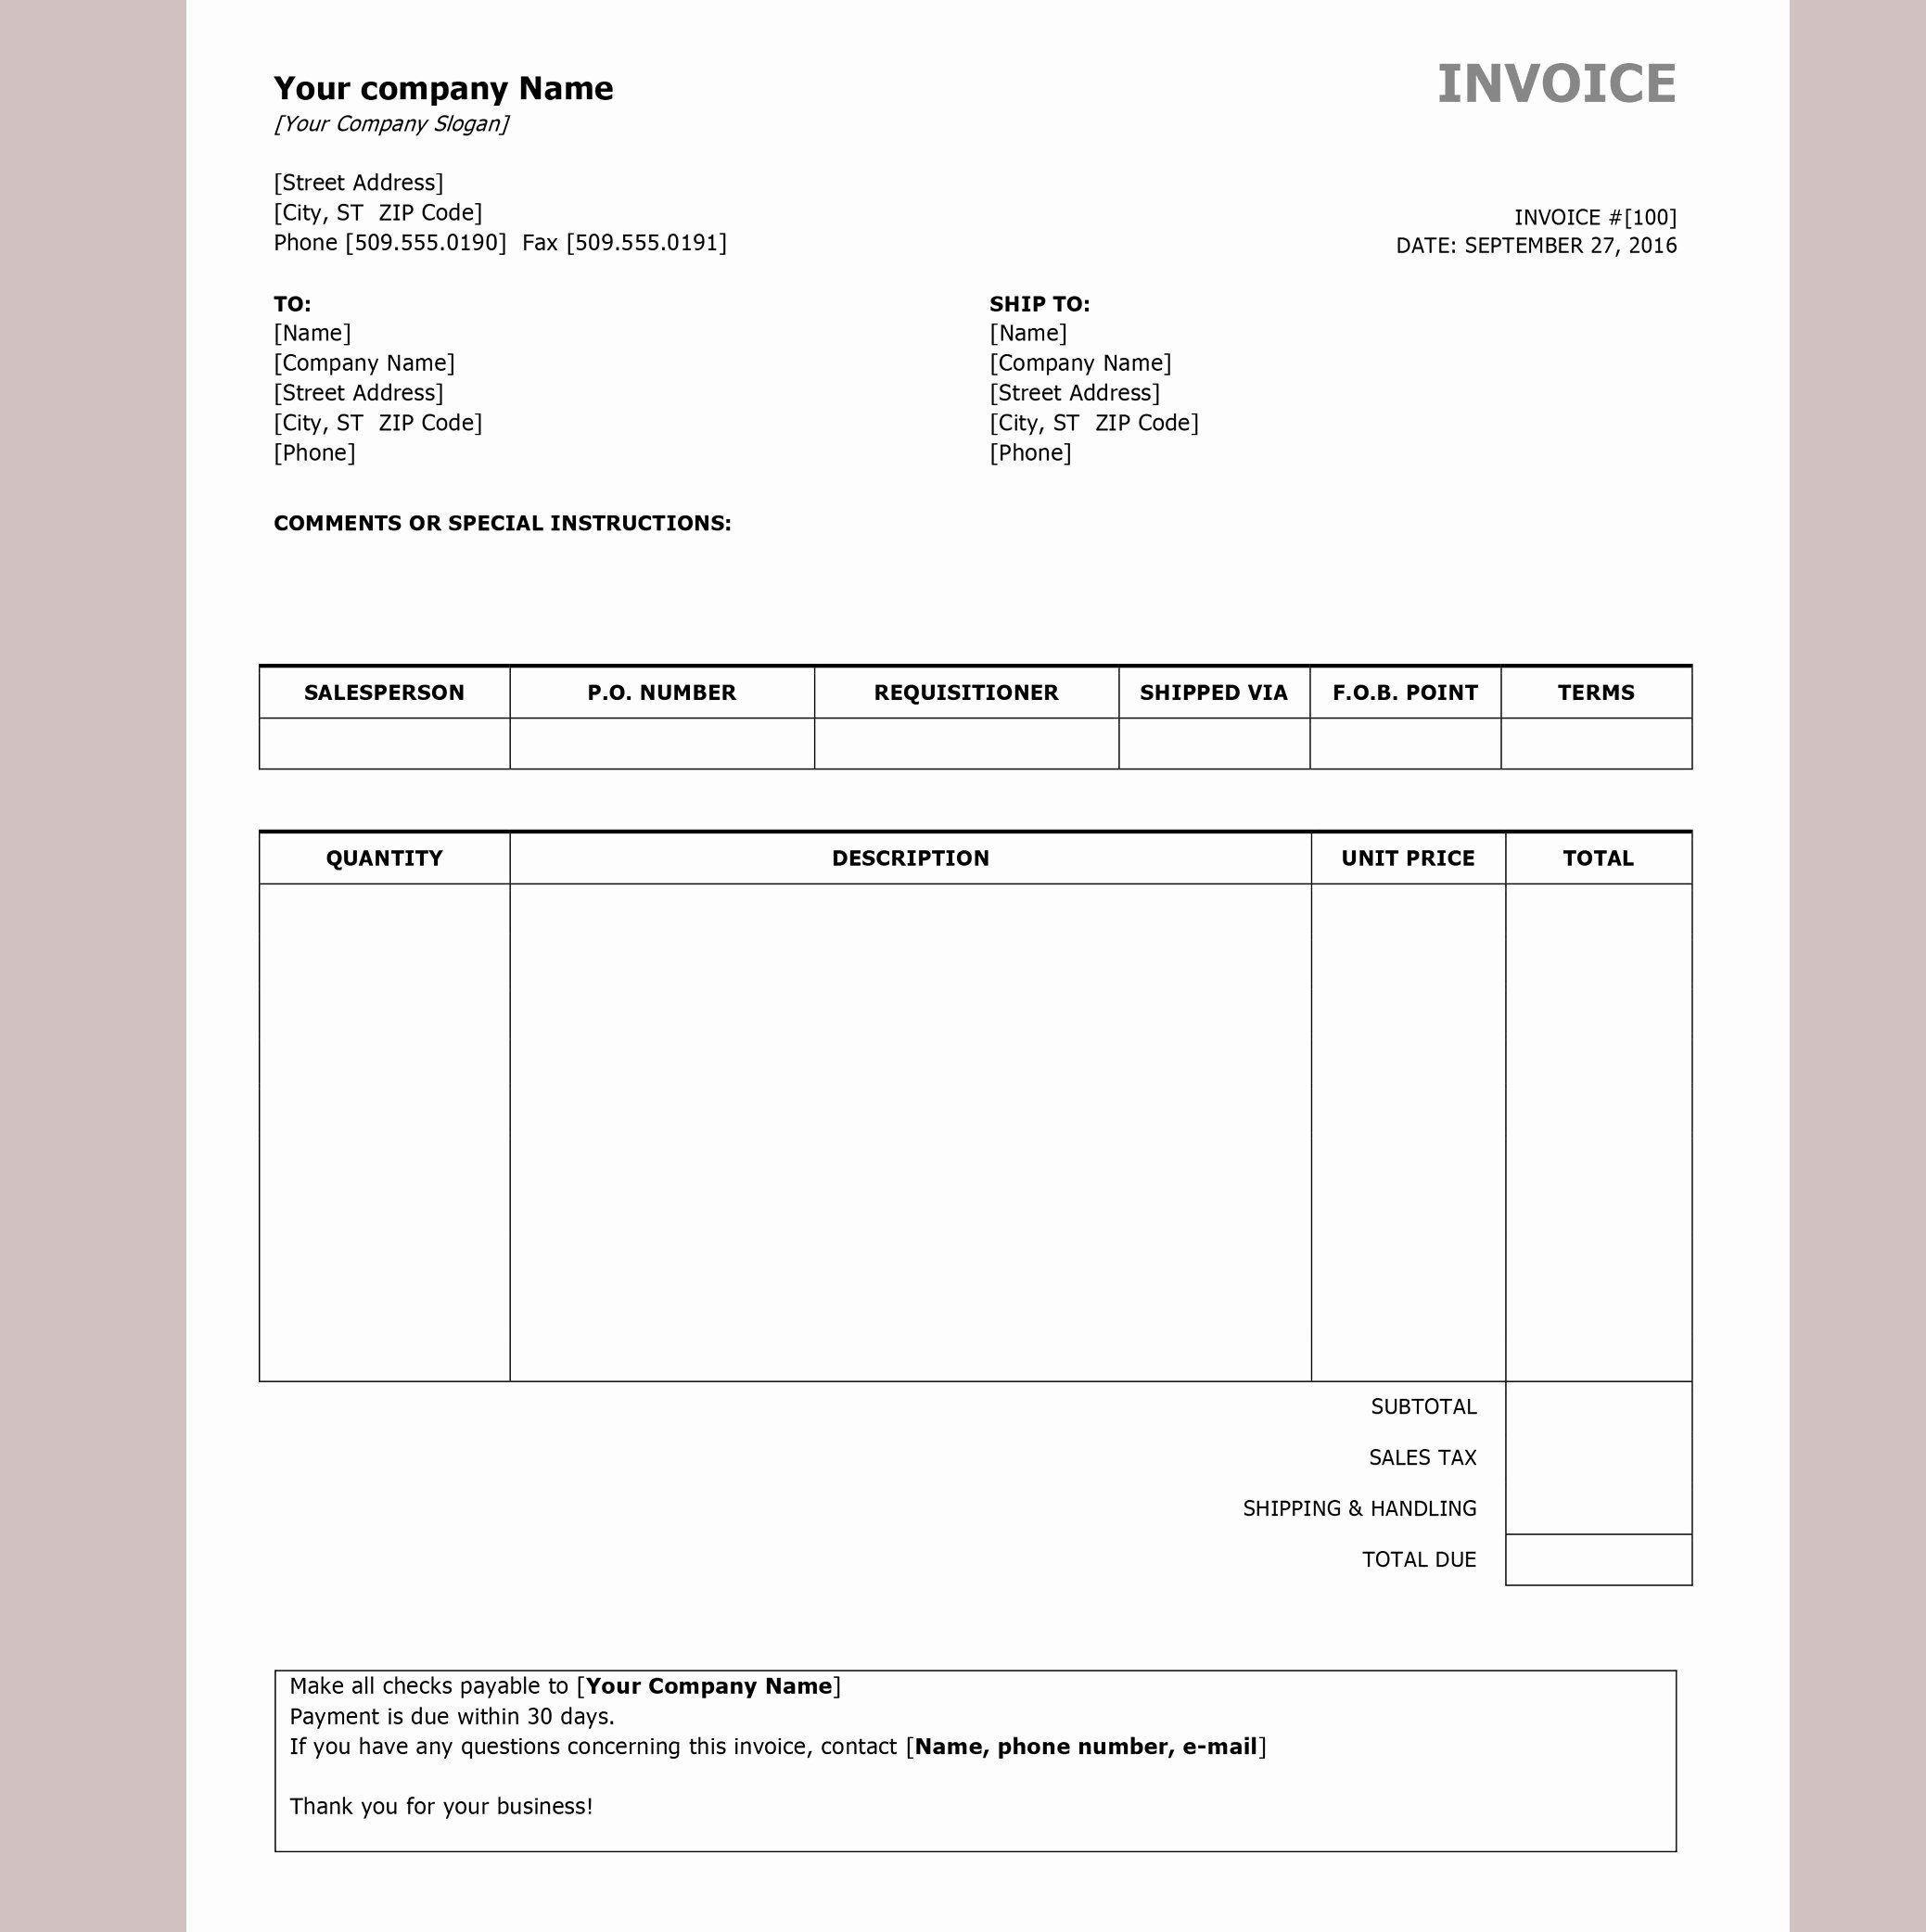 Paid In Full Invoice Template Unique Paid In Full Receipt Template Best Payment Invoice